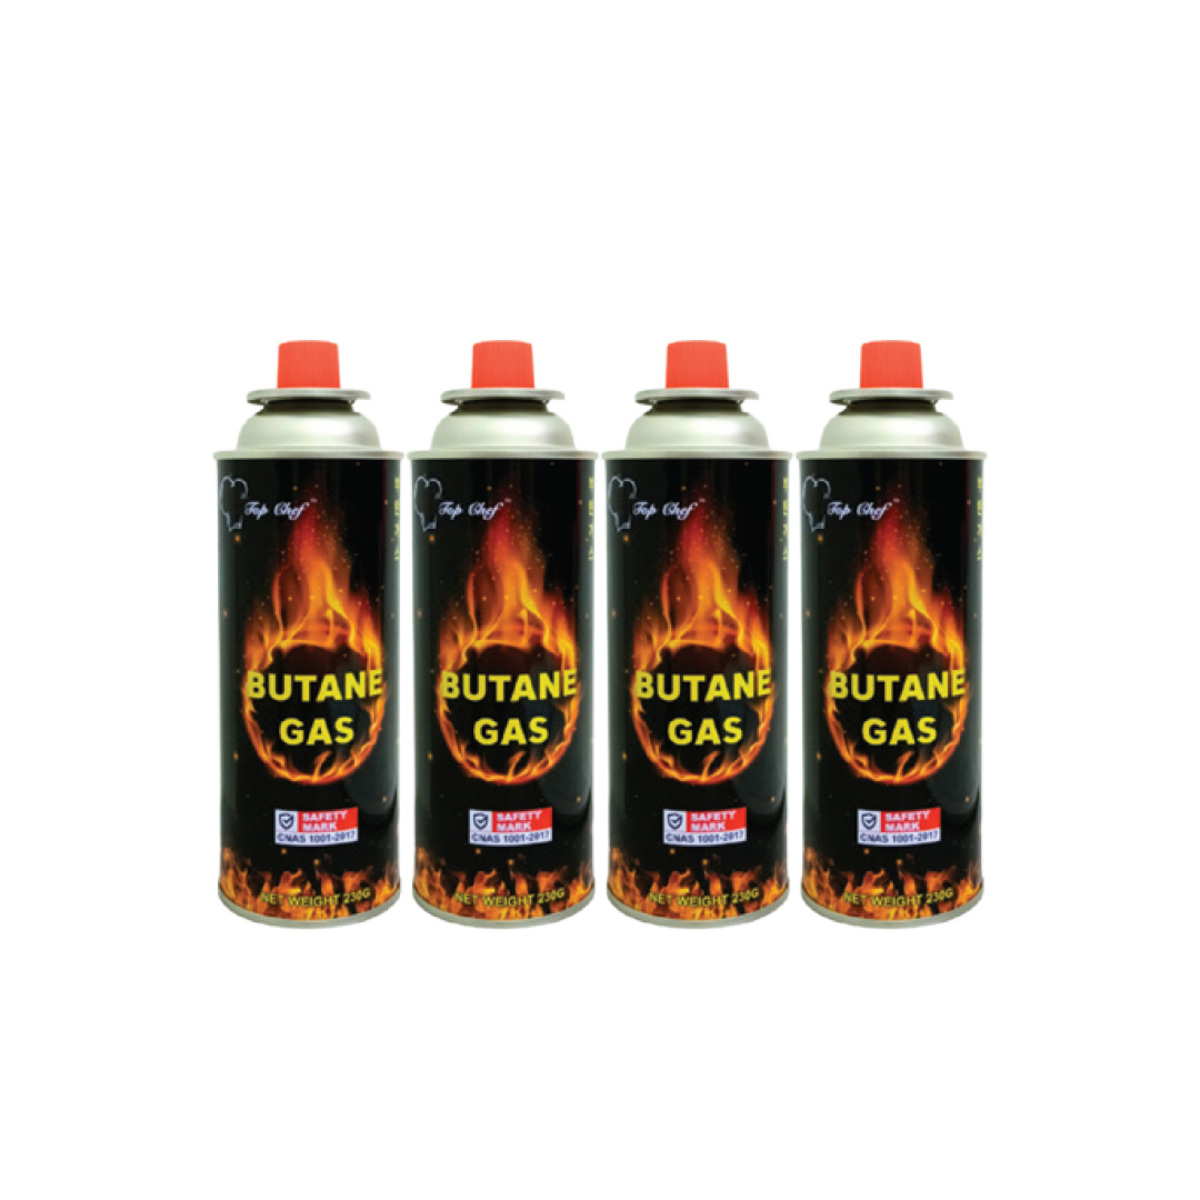 Top Chef 4 in 1 Butane Gas 230g